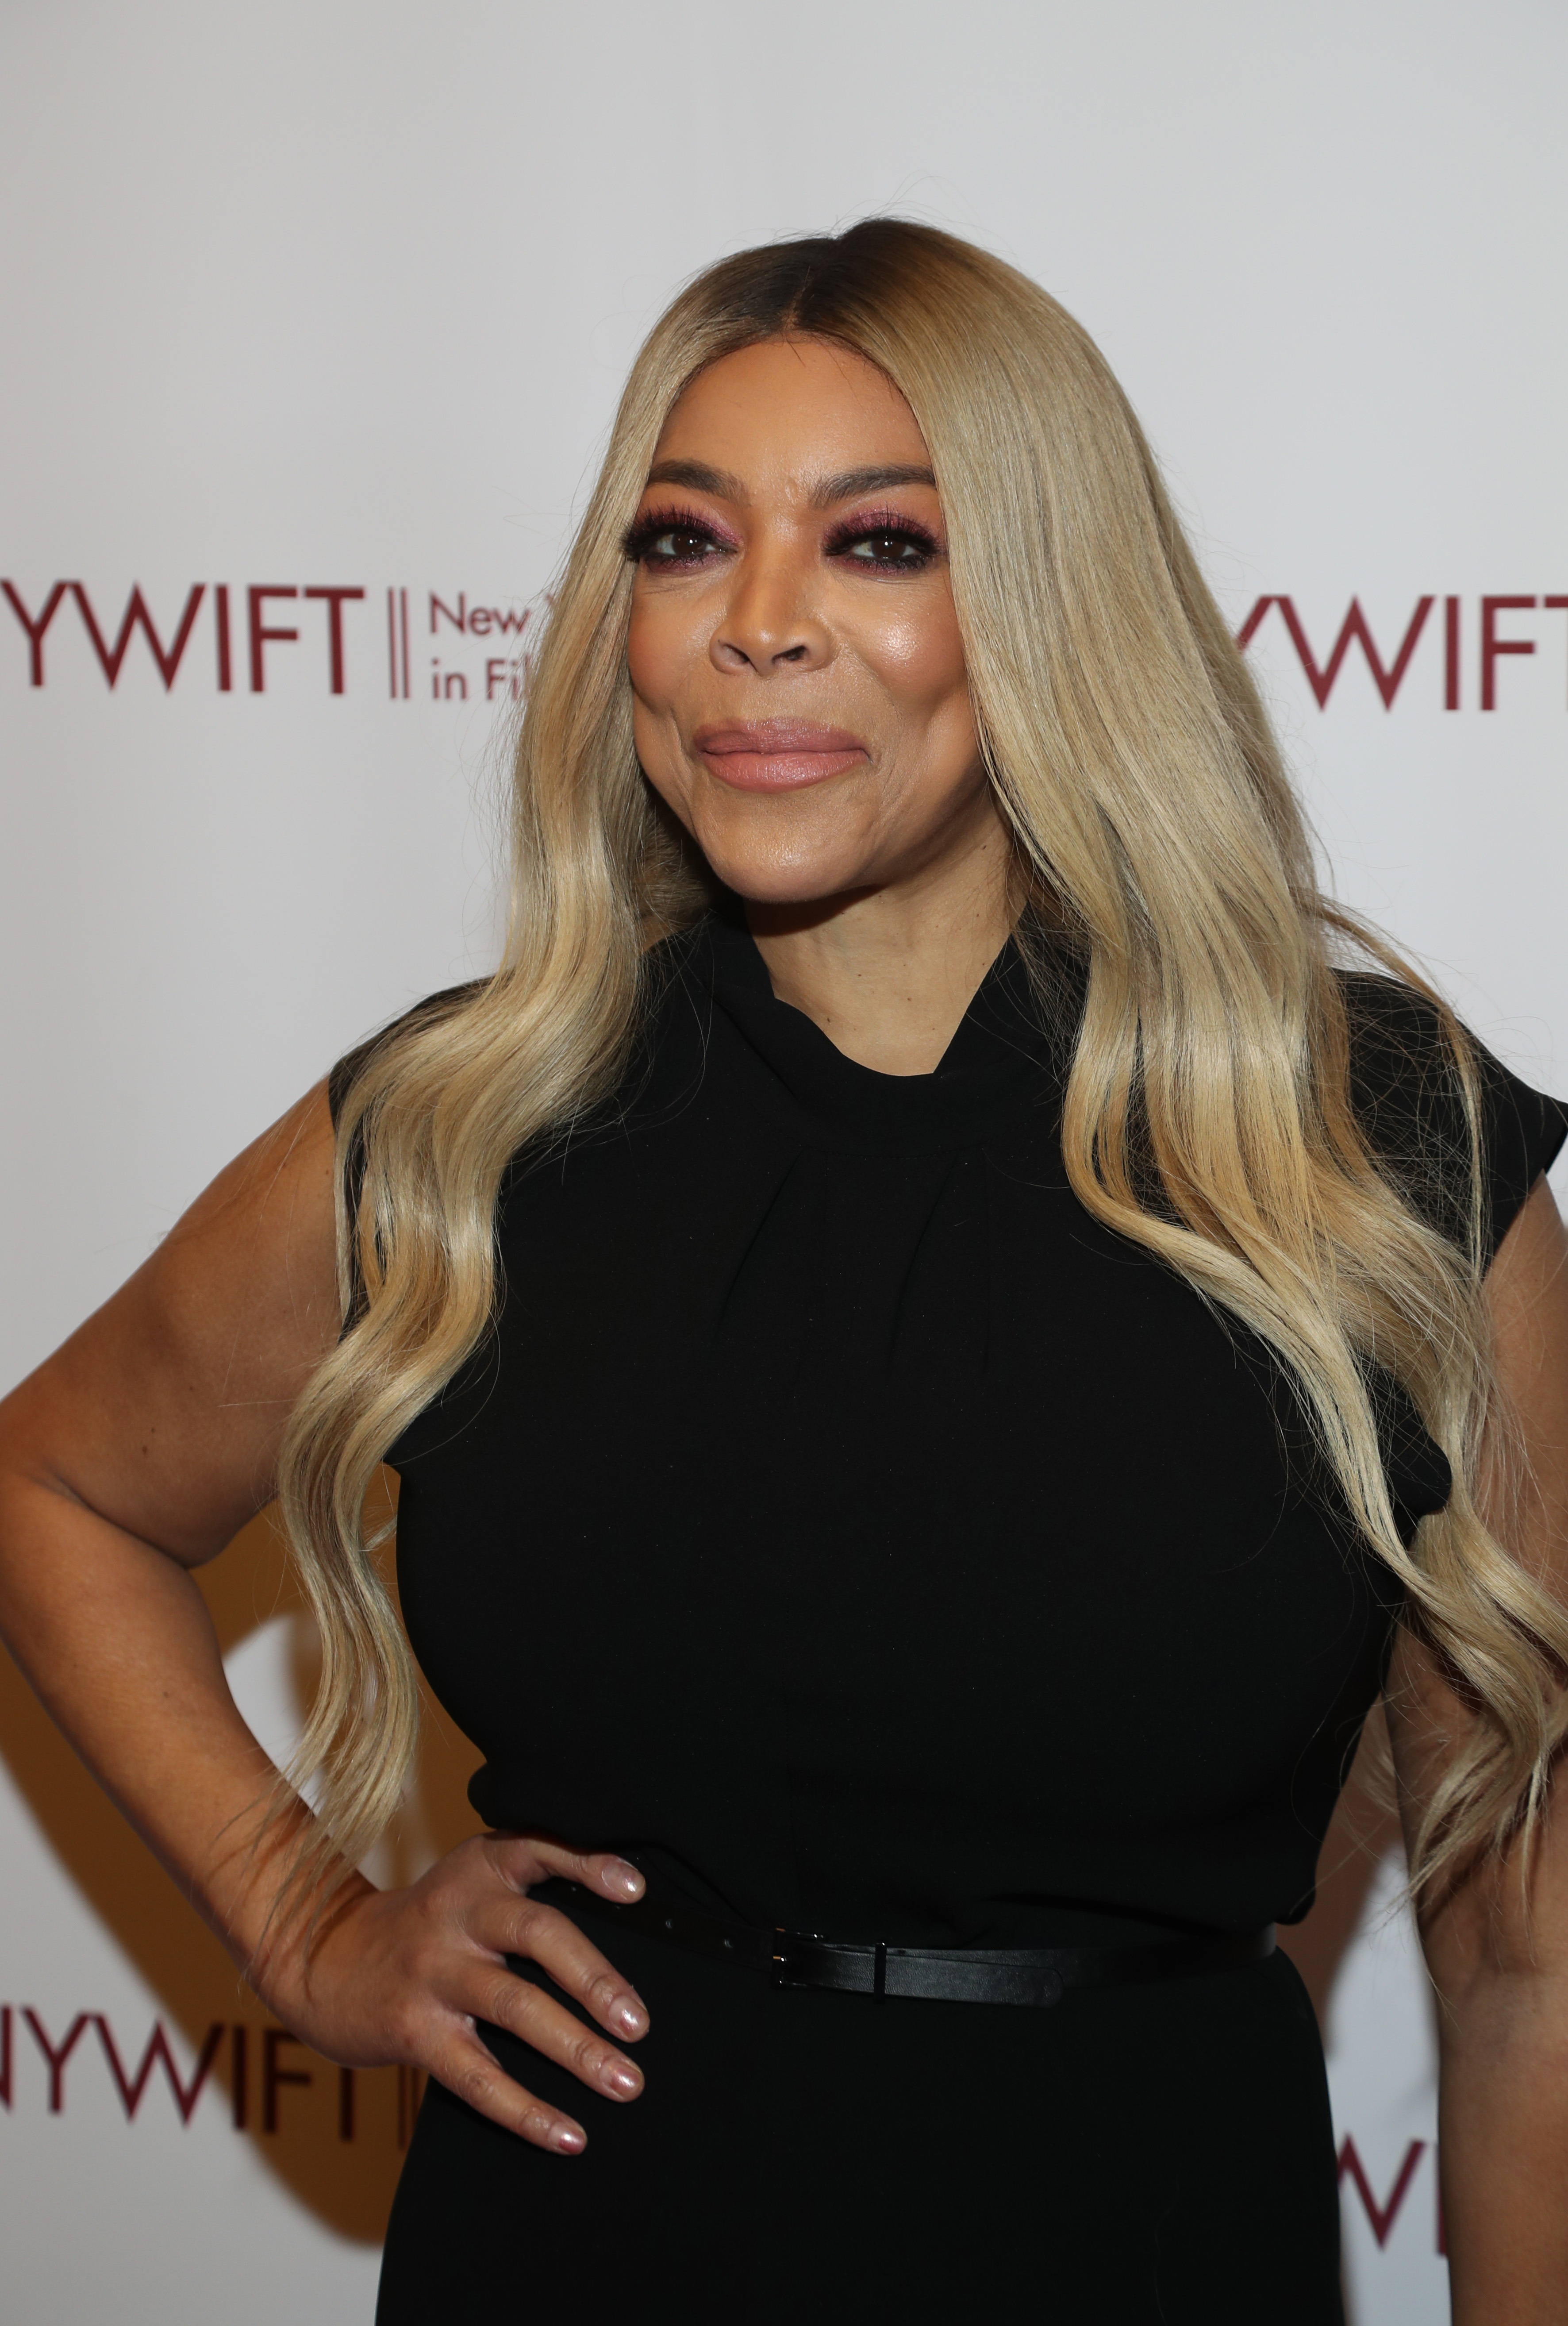 Wendy Williams stands posing in a sleeveless dress with a belt at an event